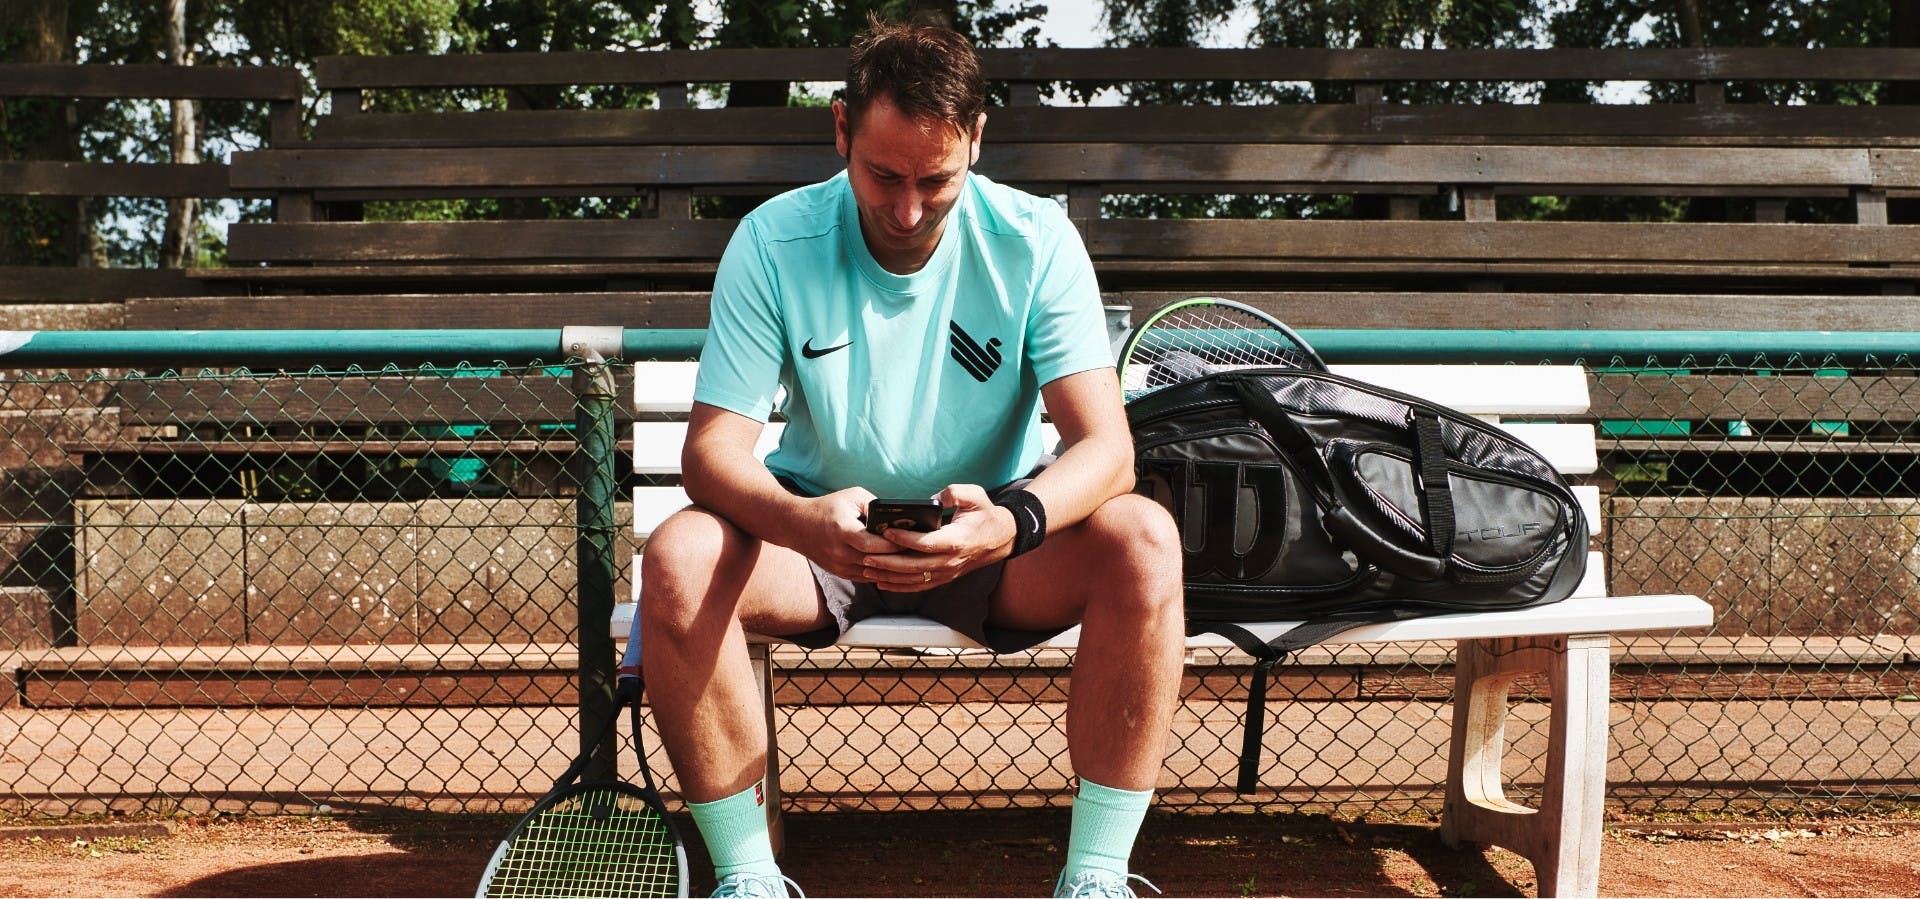 Tennis player with iPhone